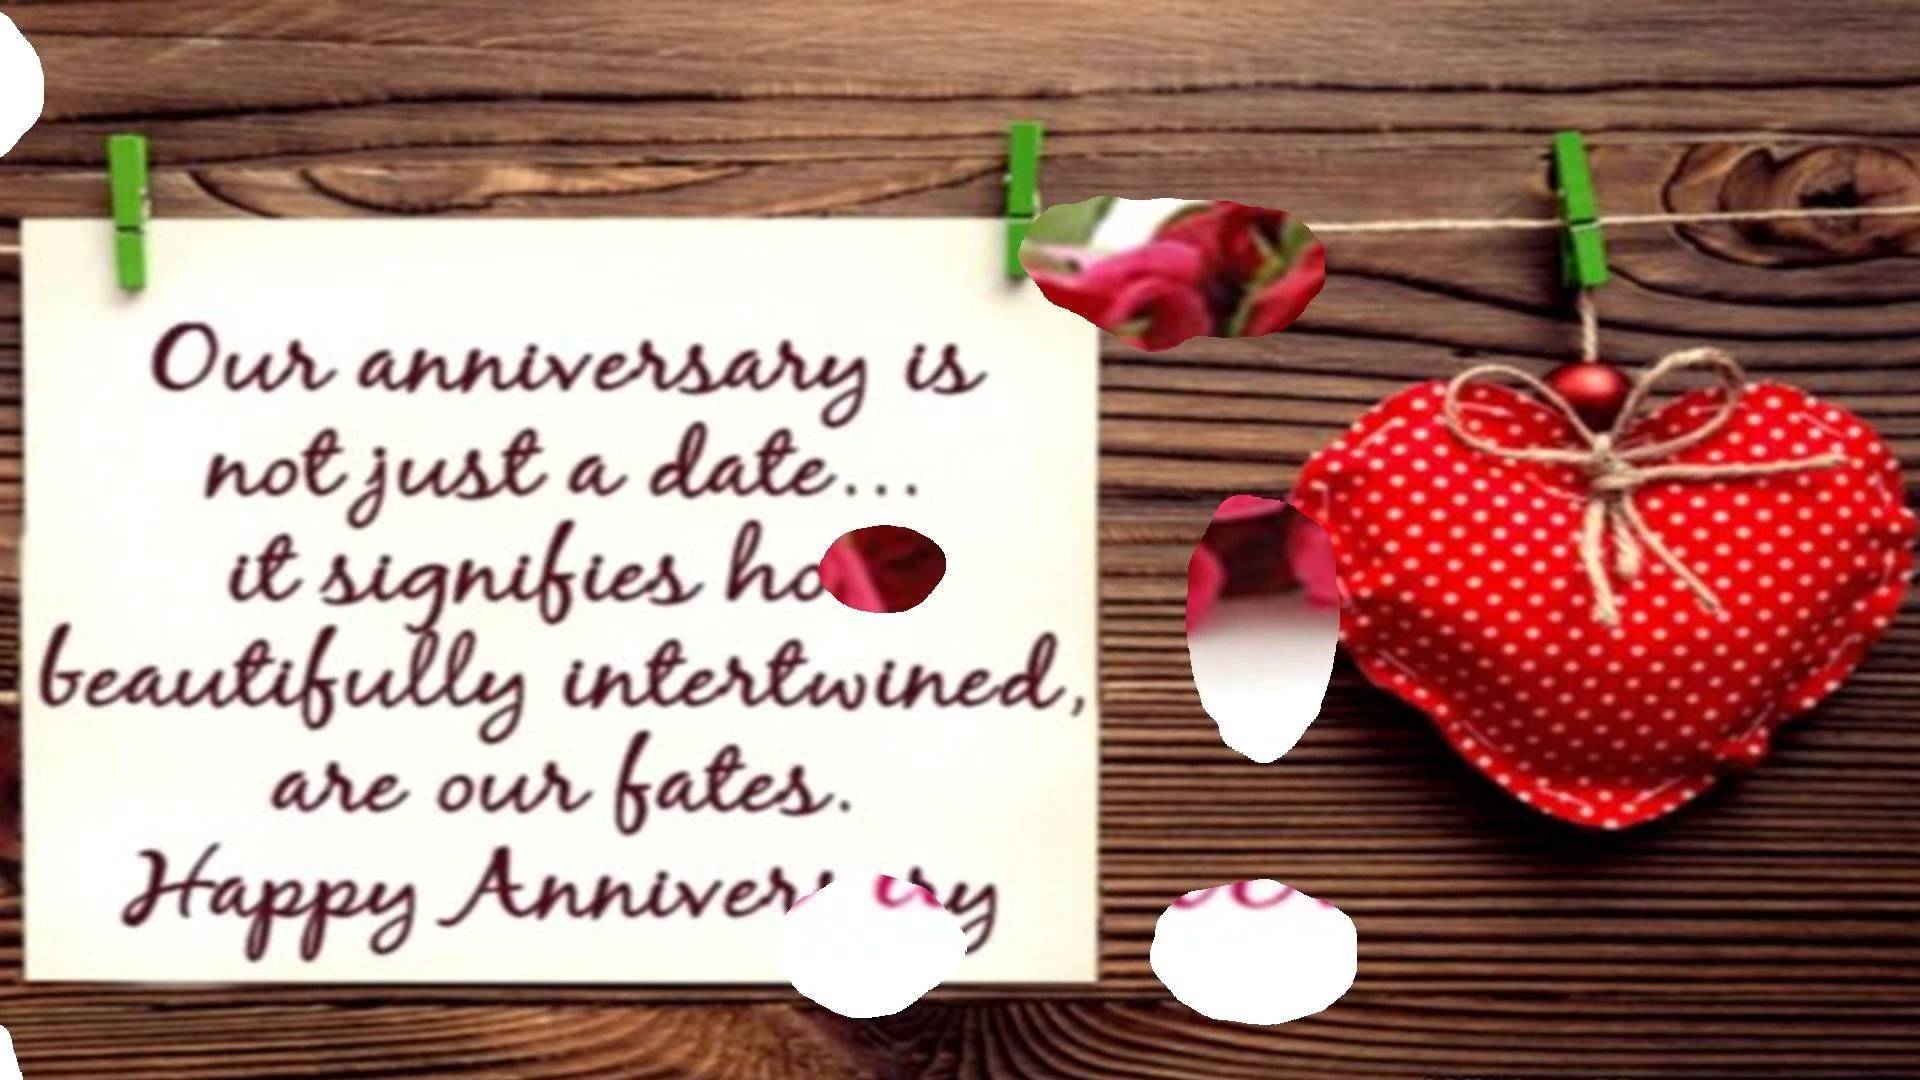 1920x1080 Happy marriage anniversary wishes to my friend HD wallpapers | HD .